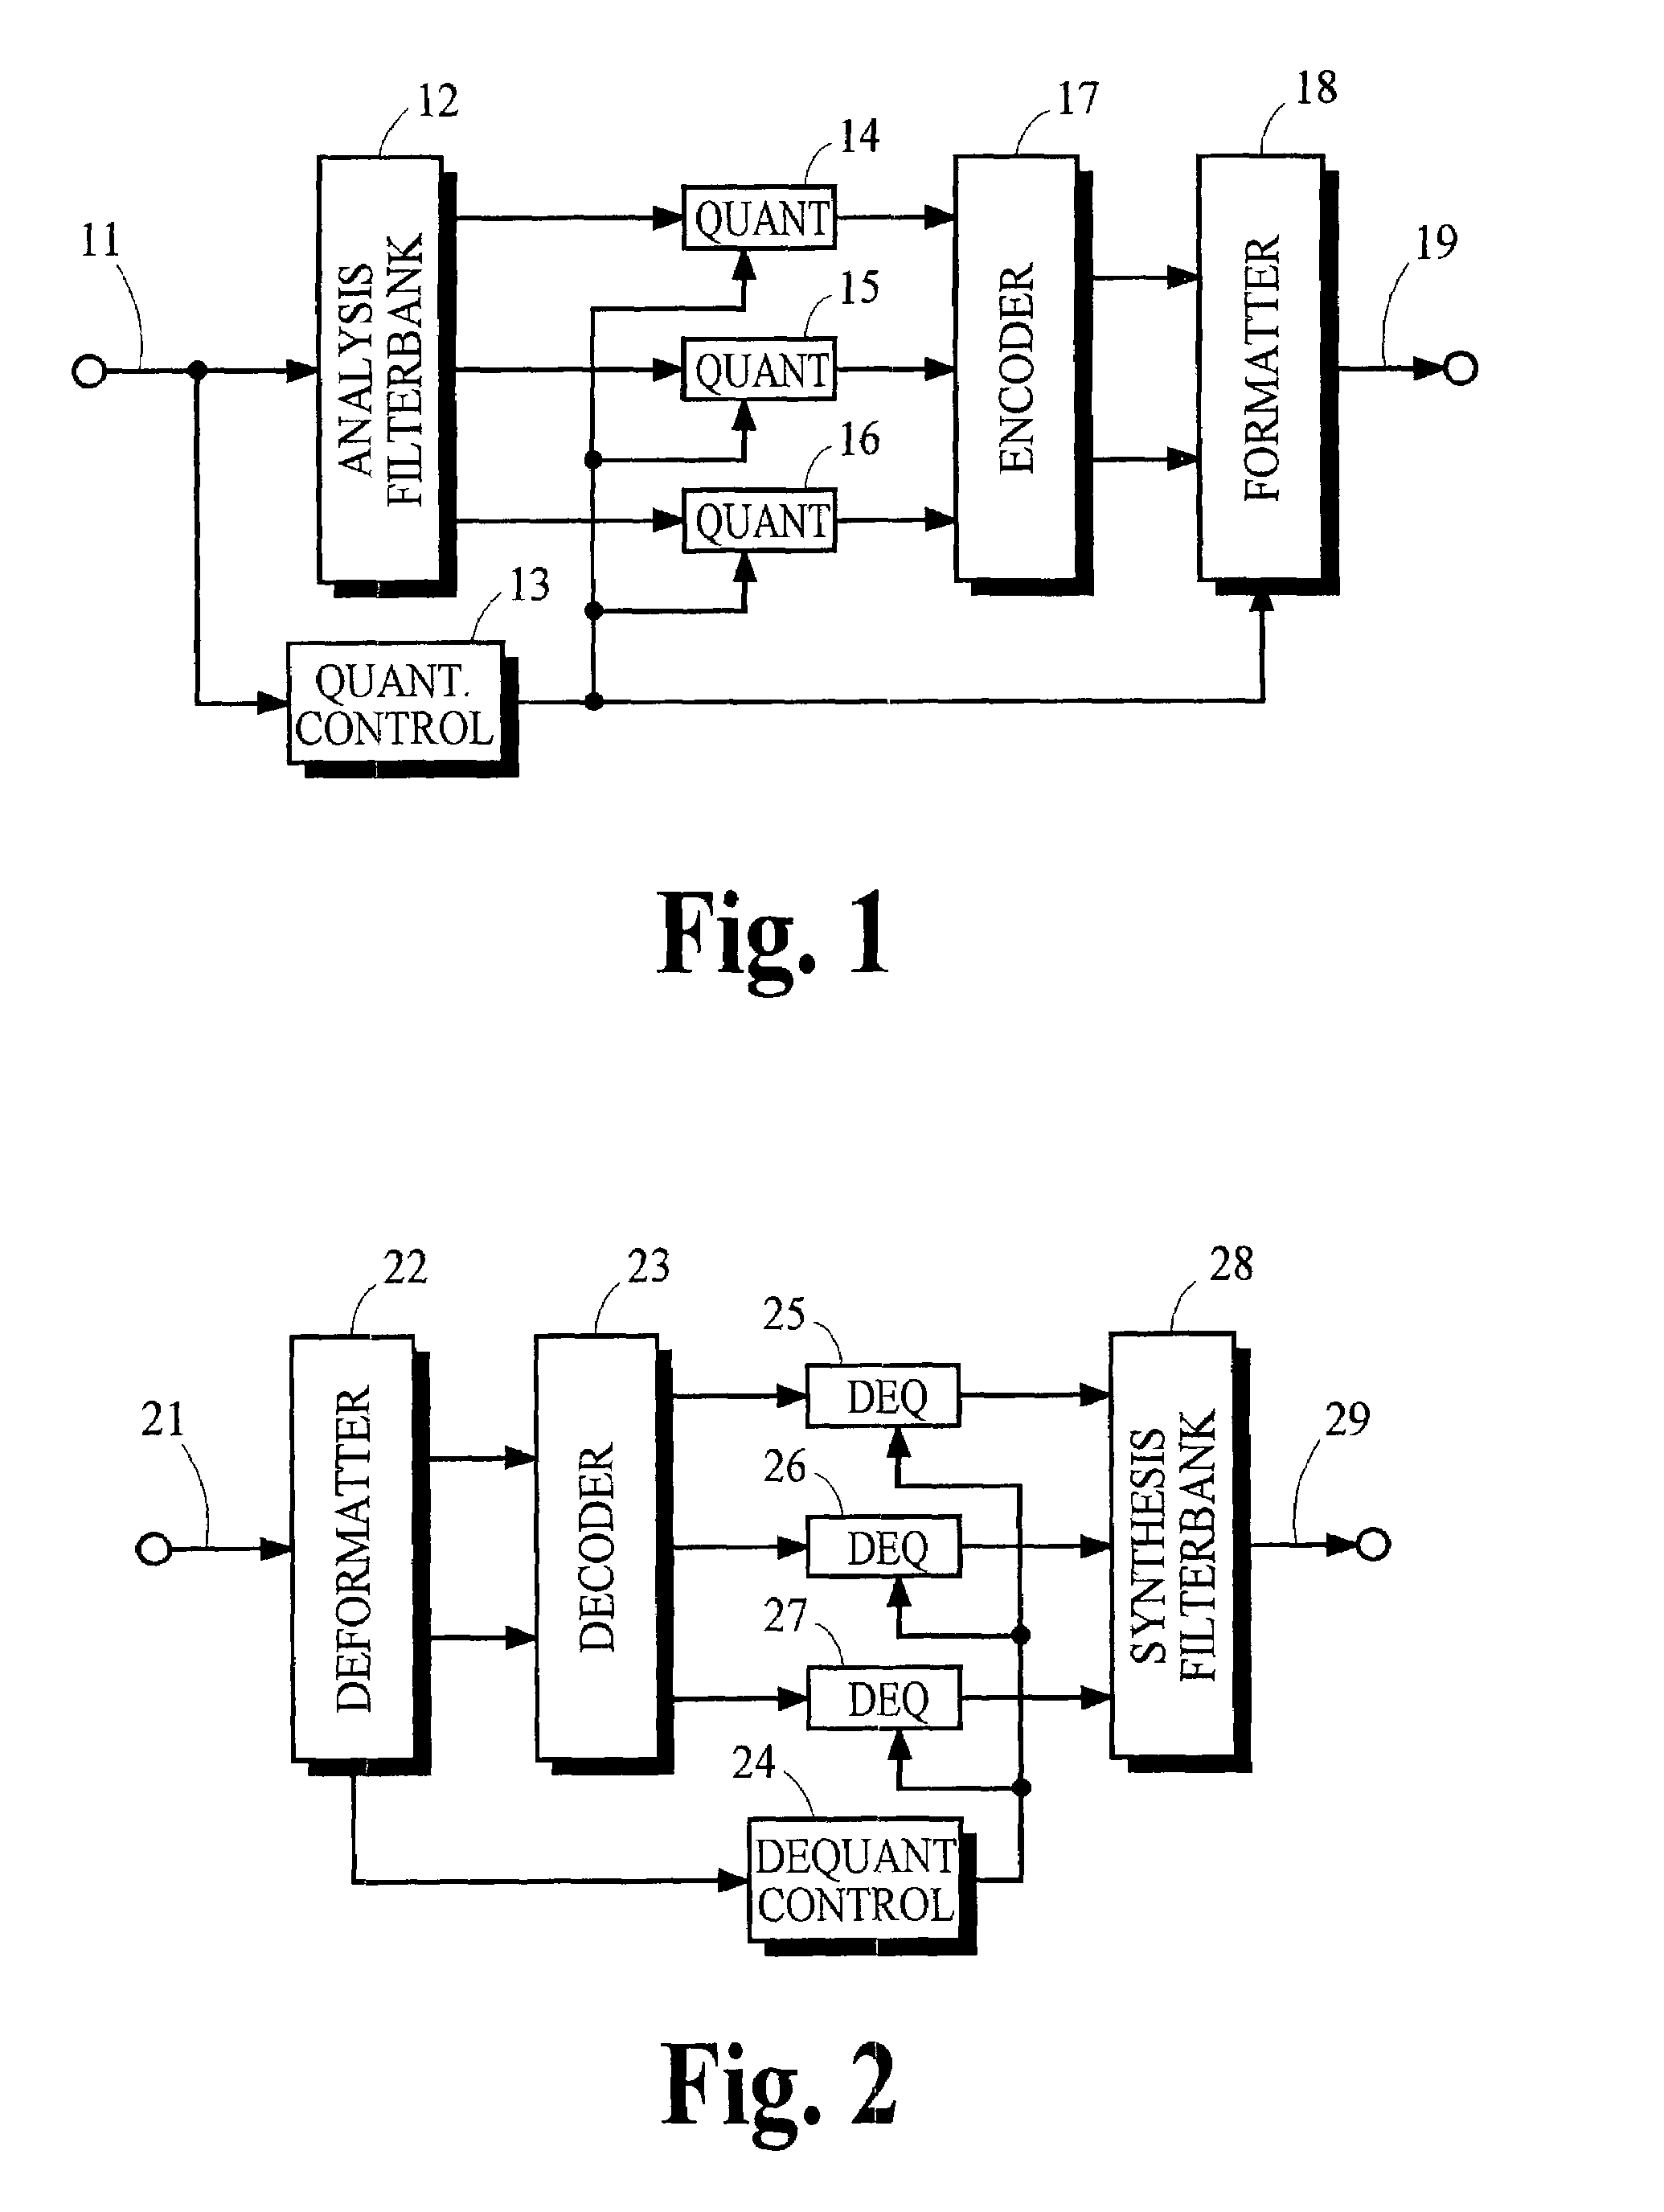 Low bit-rate audio coding systems and methods that use expanding quantizers with arithmetic coding